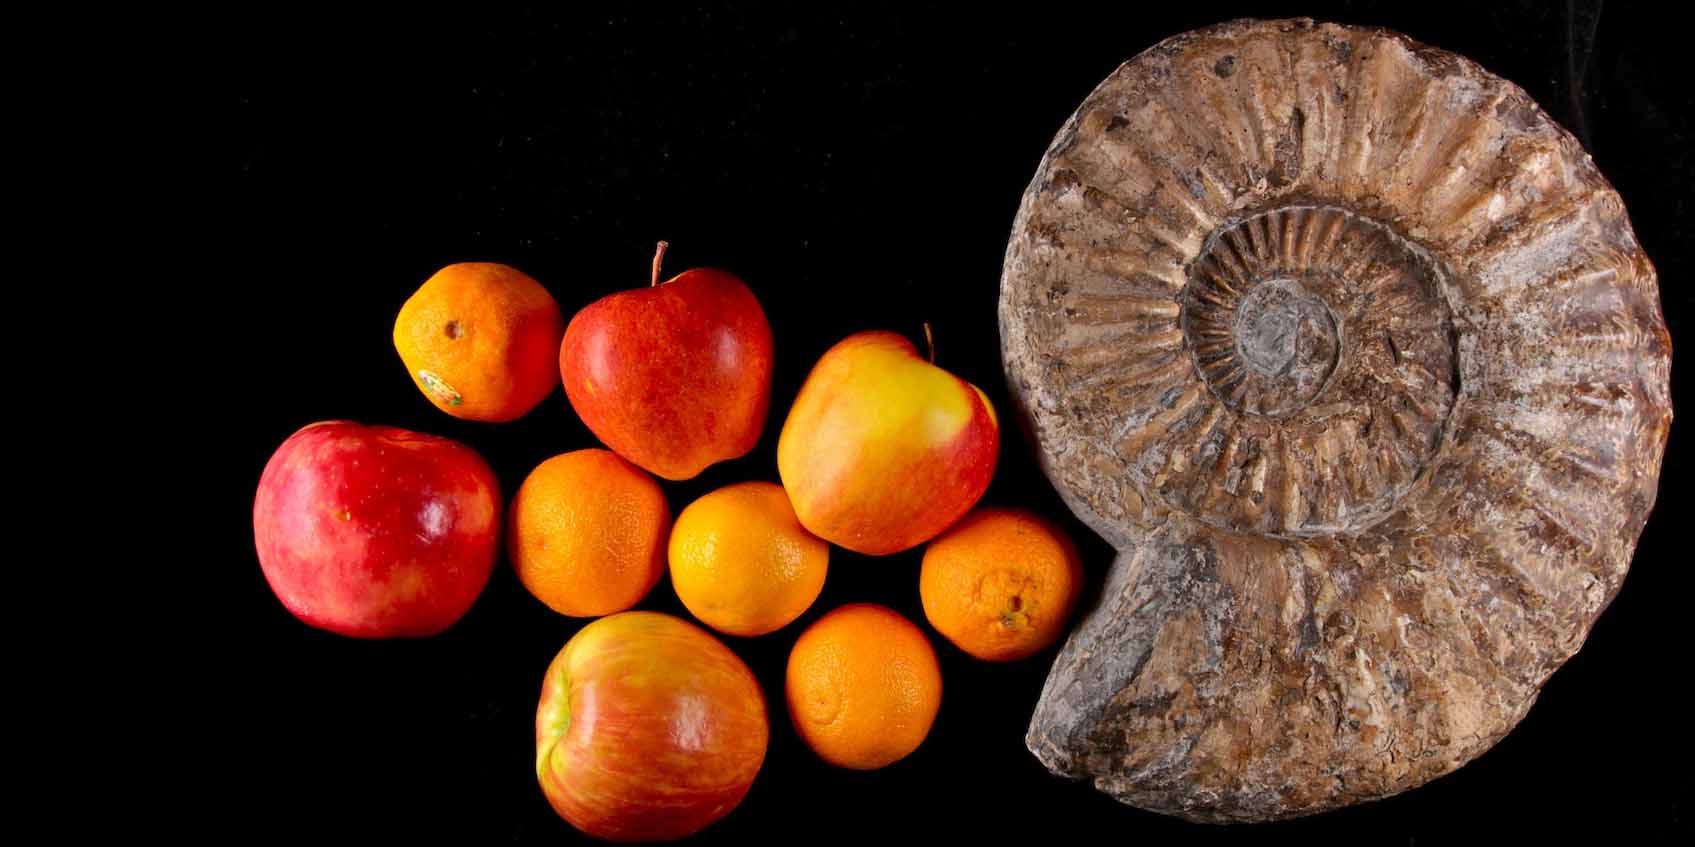 A spiral shell-like fossil next to apples and oranges